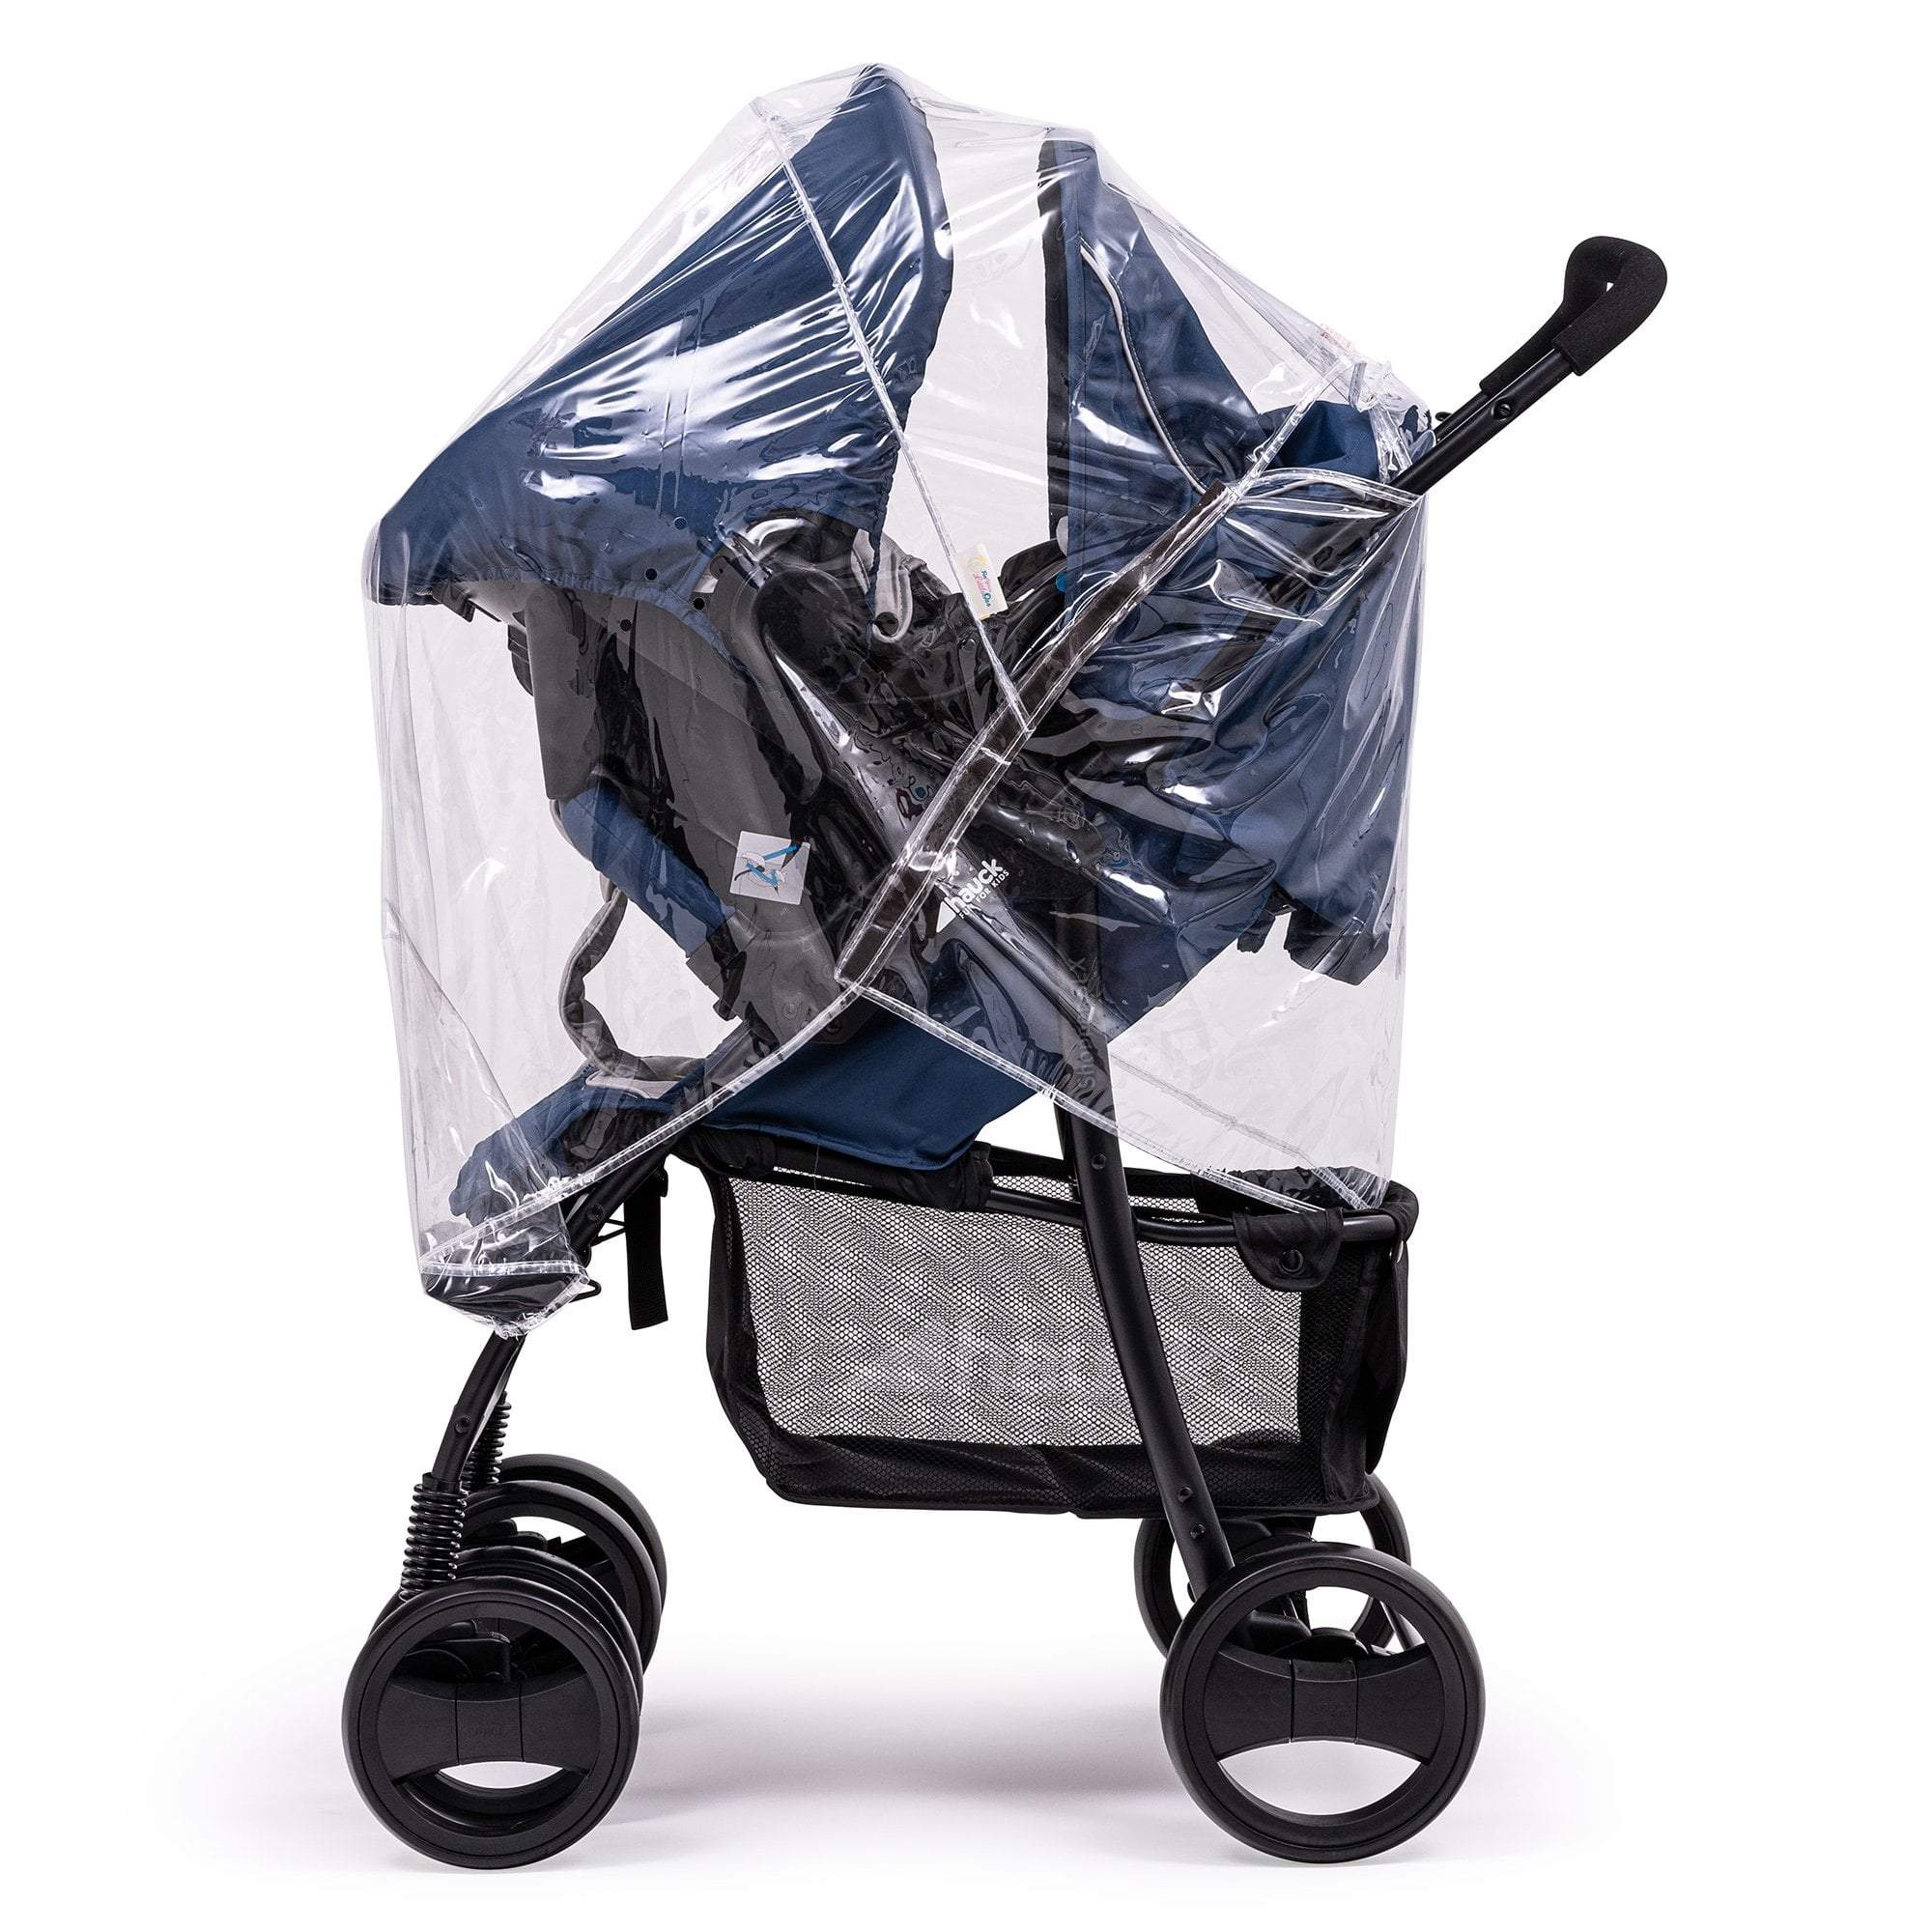 Travel System Raincover Compatible with Egg - Fits All Models - For Your Little One